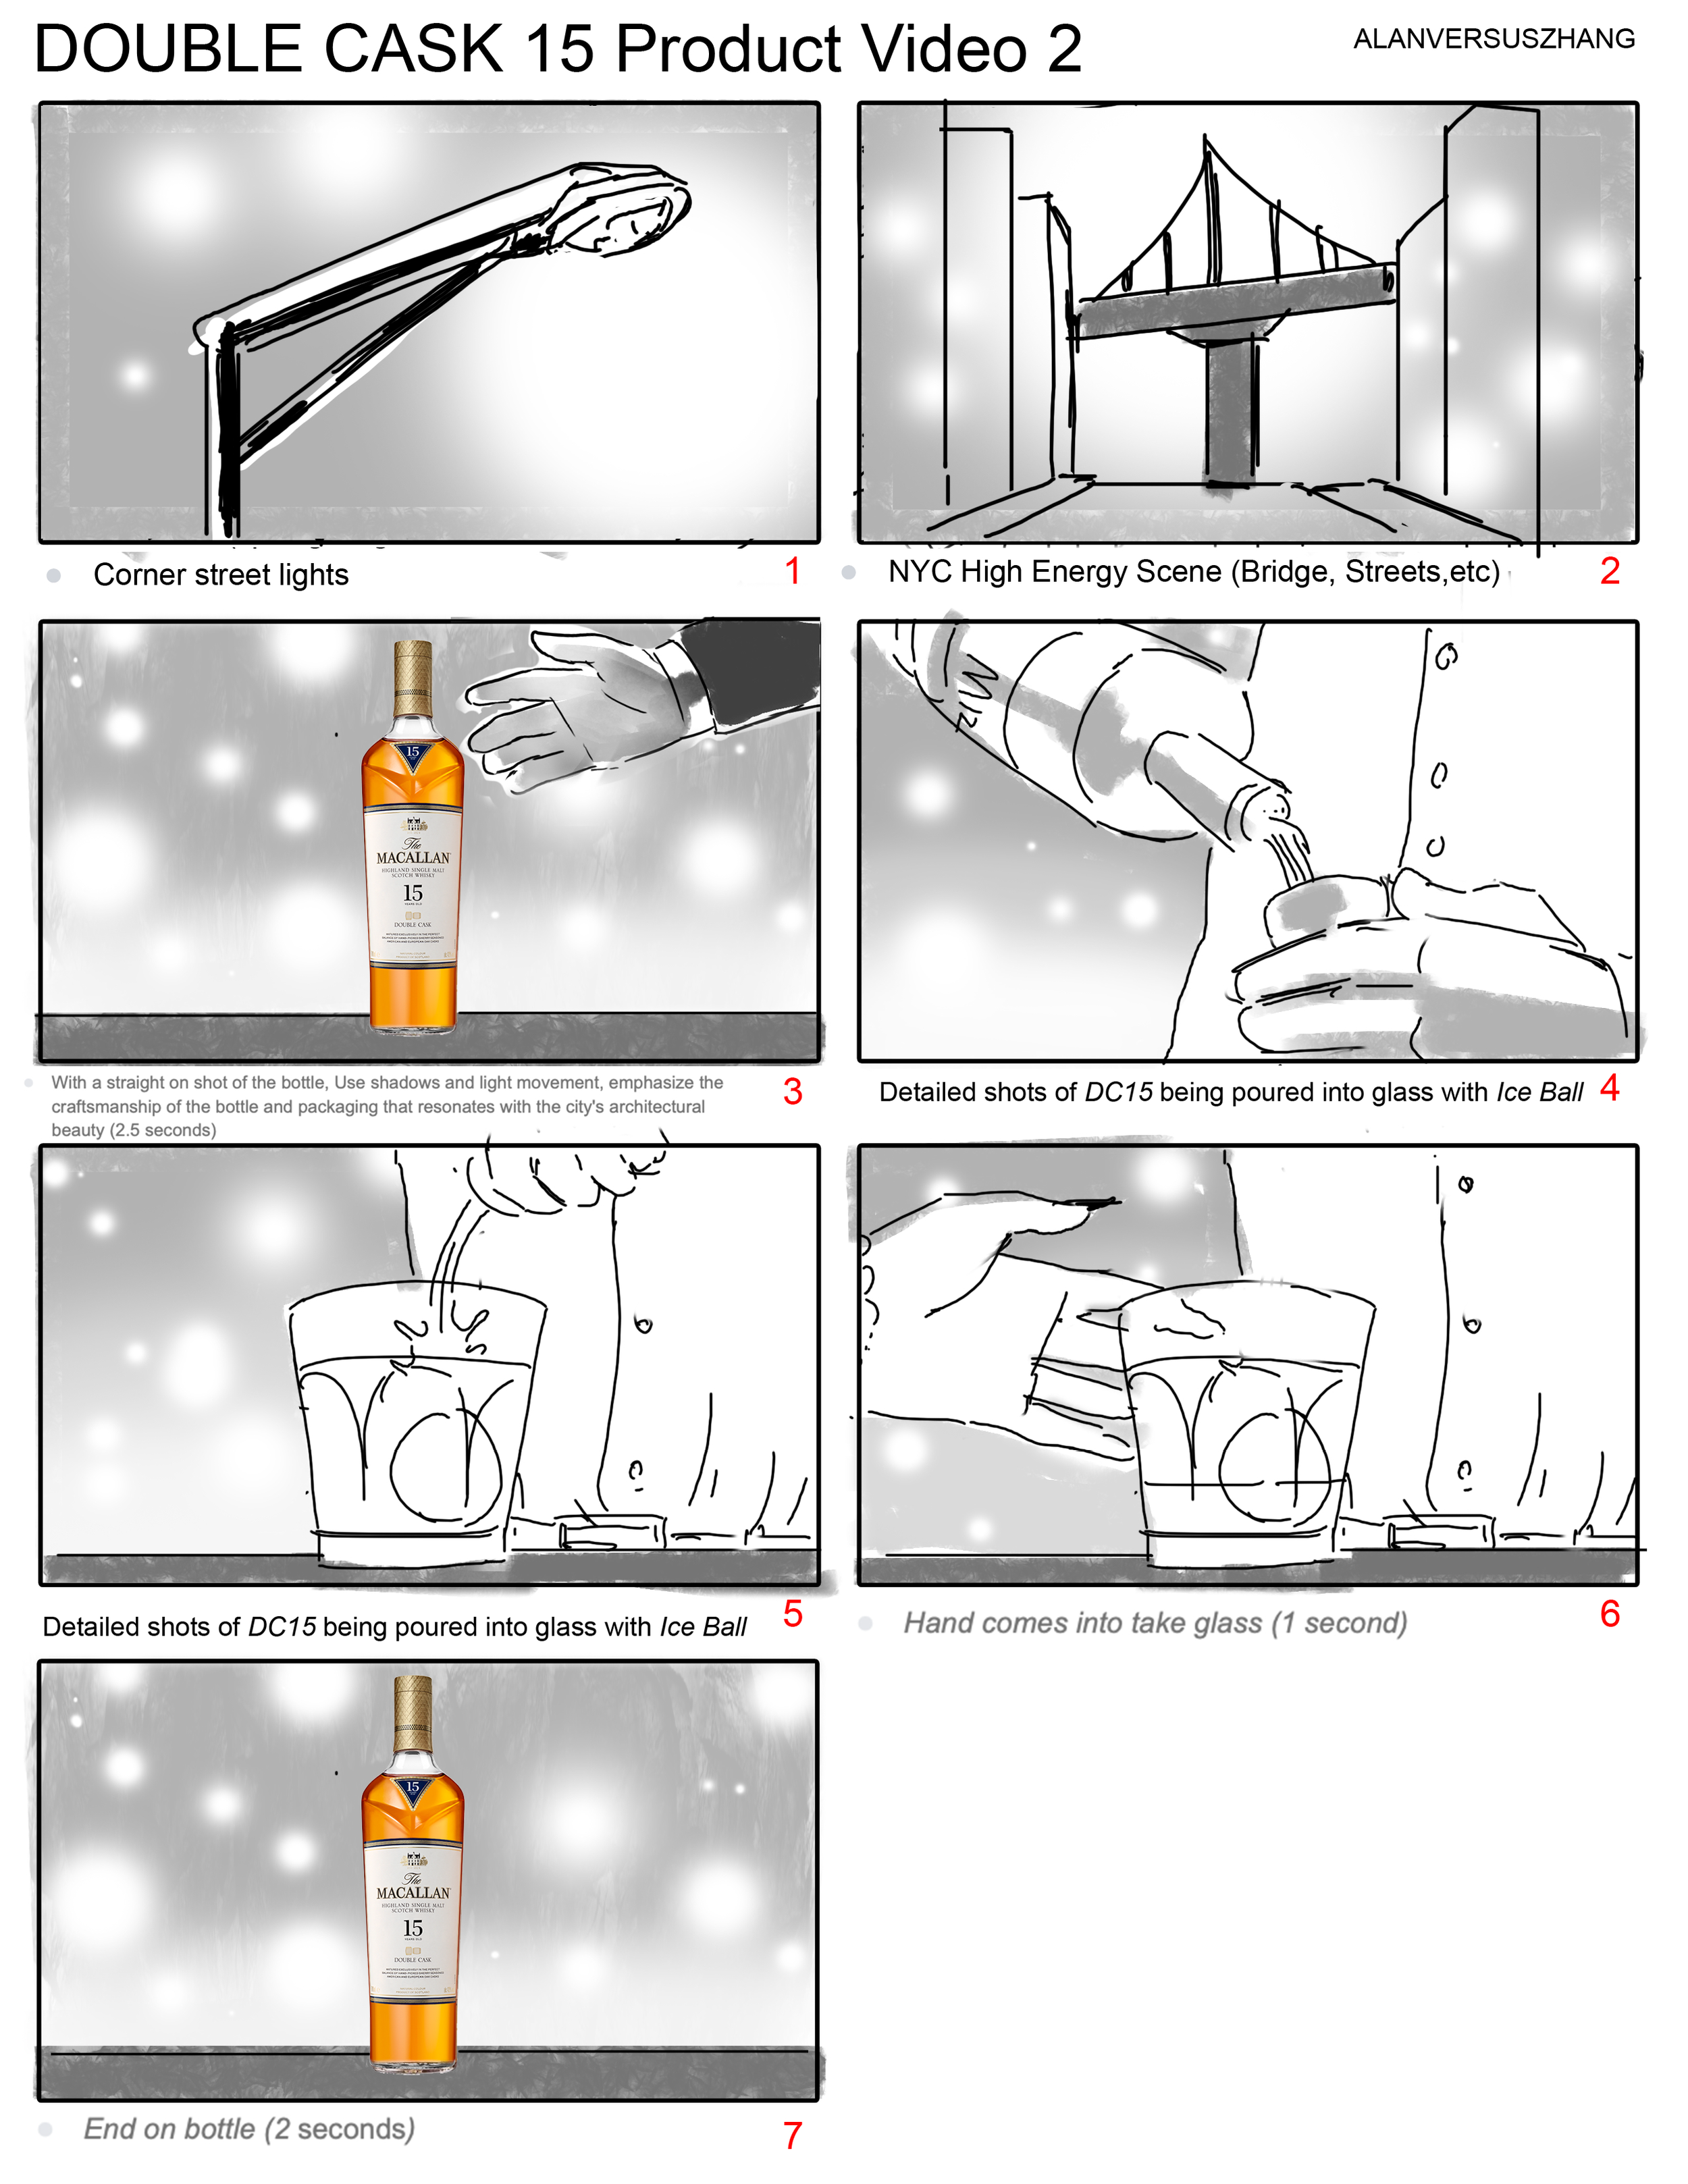 11.10.23_Macallan_Storyboards_Page_06_Image_0001.png